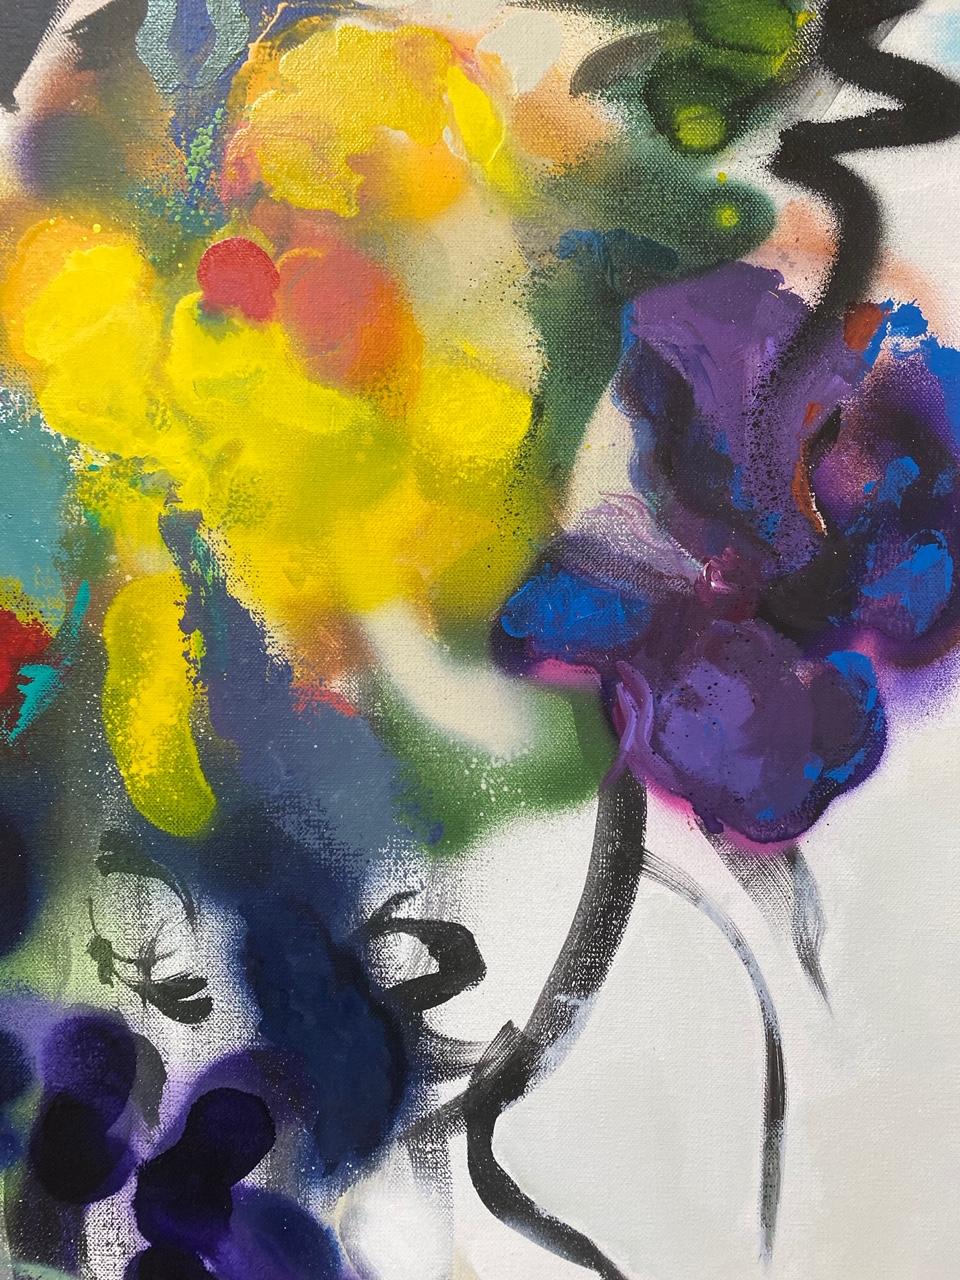 Wild Flowers II, original 40x30 abstract impressionist still life - Abstract Expressionist Painting by Carol Carpenter